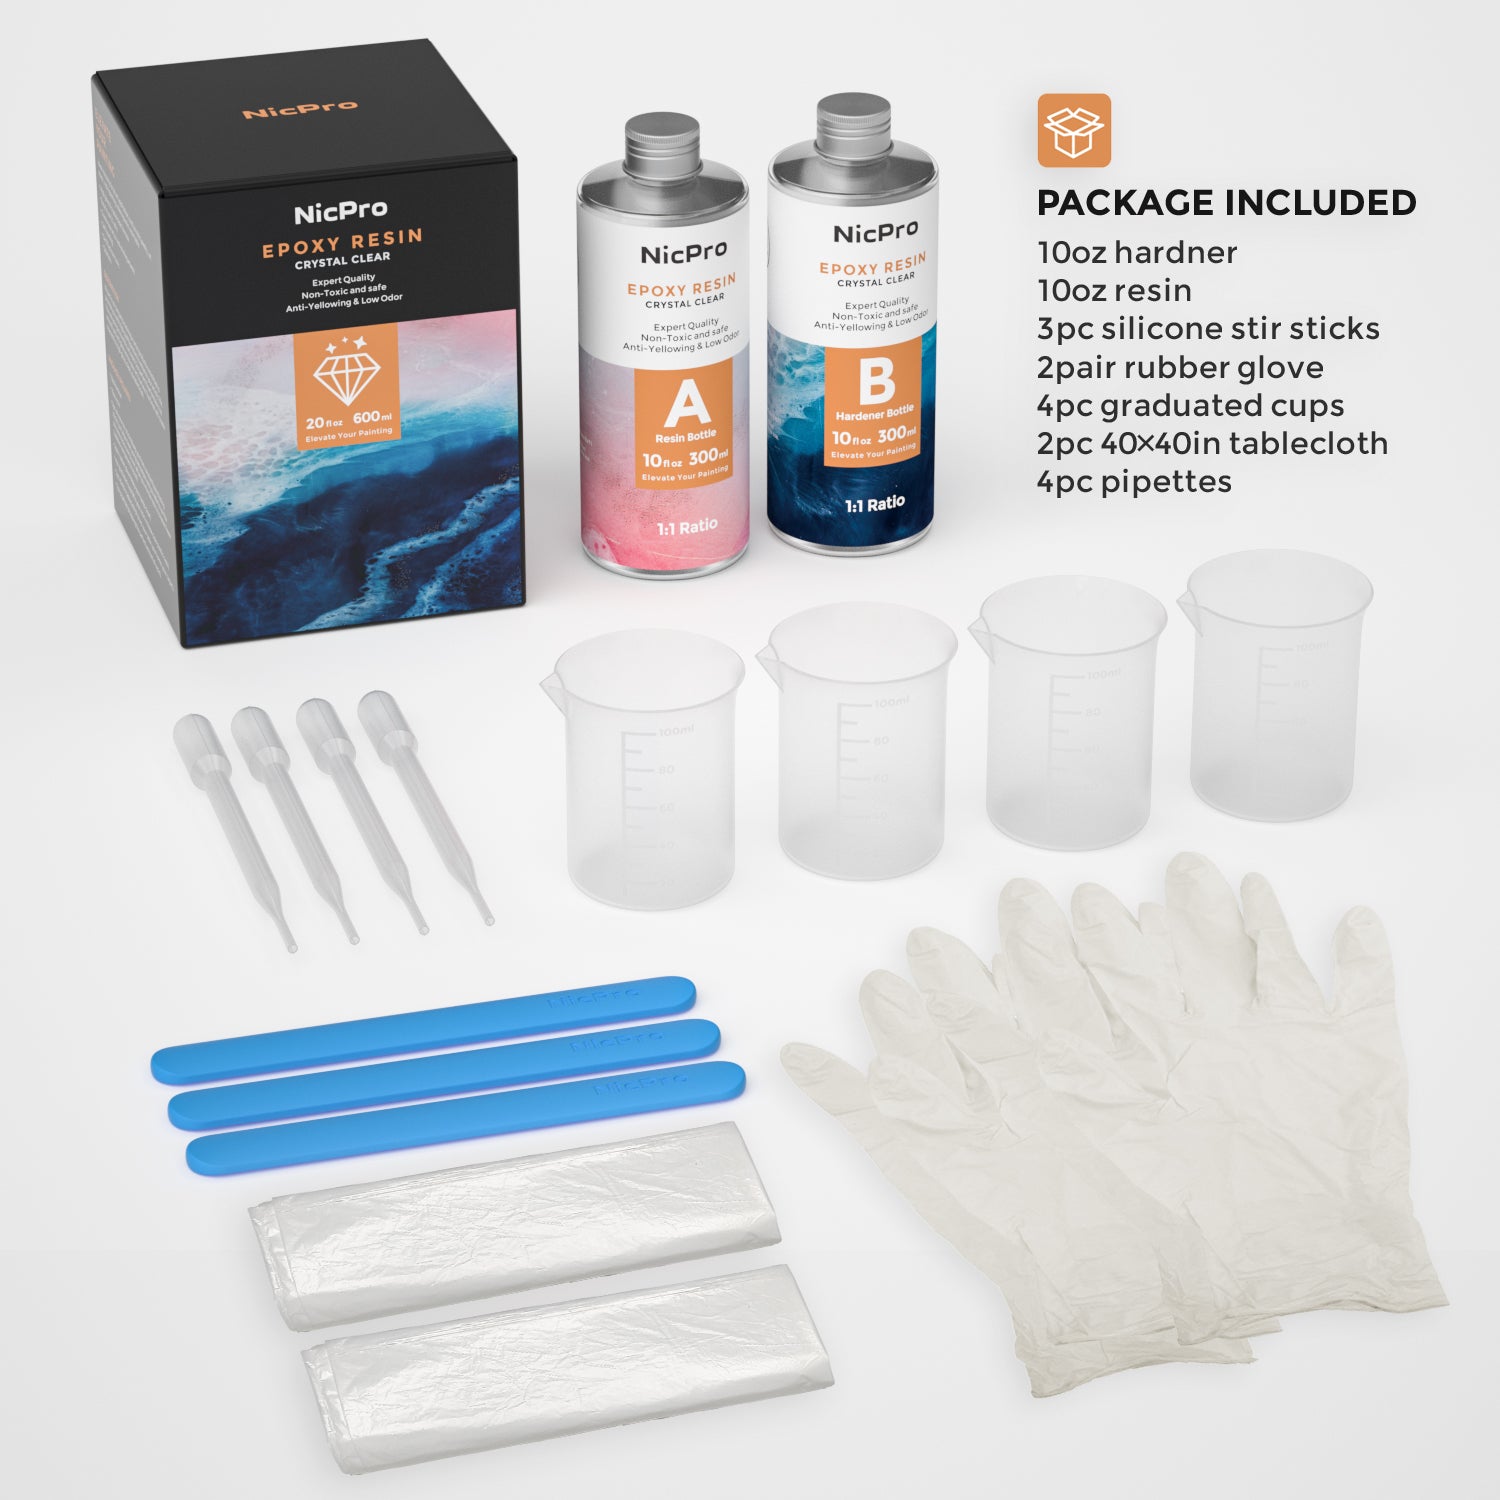 Nicpro 2 Part Art Epoxy Resin 20 Oz. Starter Clear Coating and Casting Resin with Silicone Sticks, Gloves, Measuring Cups, Tablecloths, Pipettes for Resin Molds Jewelry Making Kit- Easy Mix 1:1 Ratio